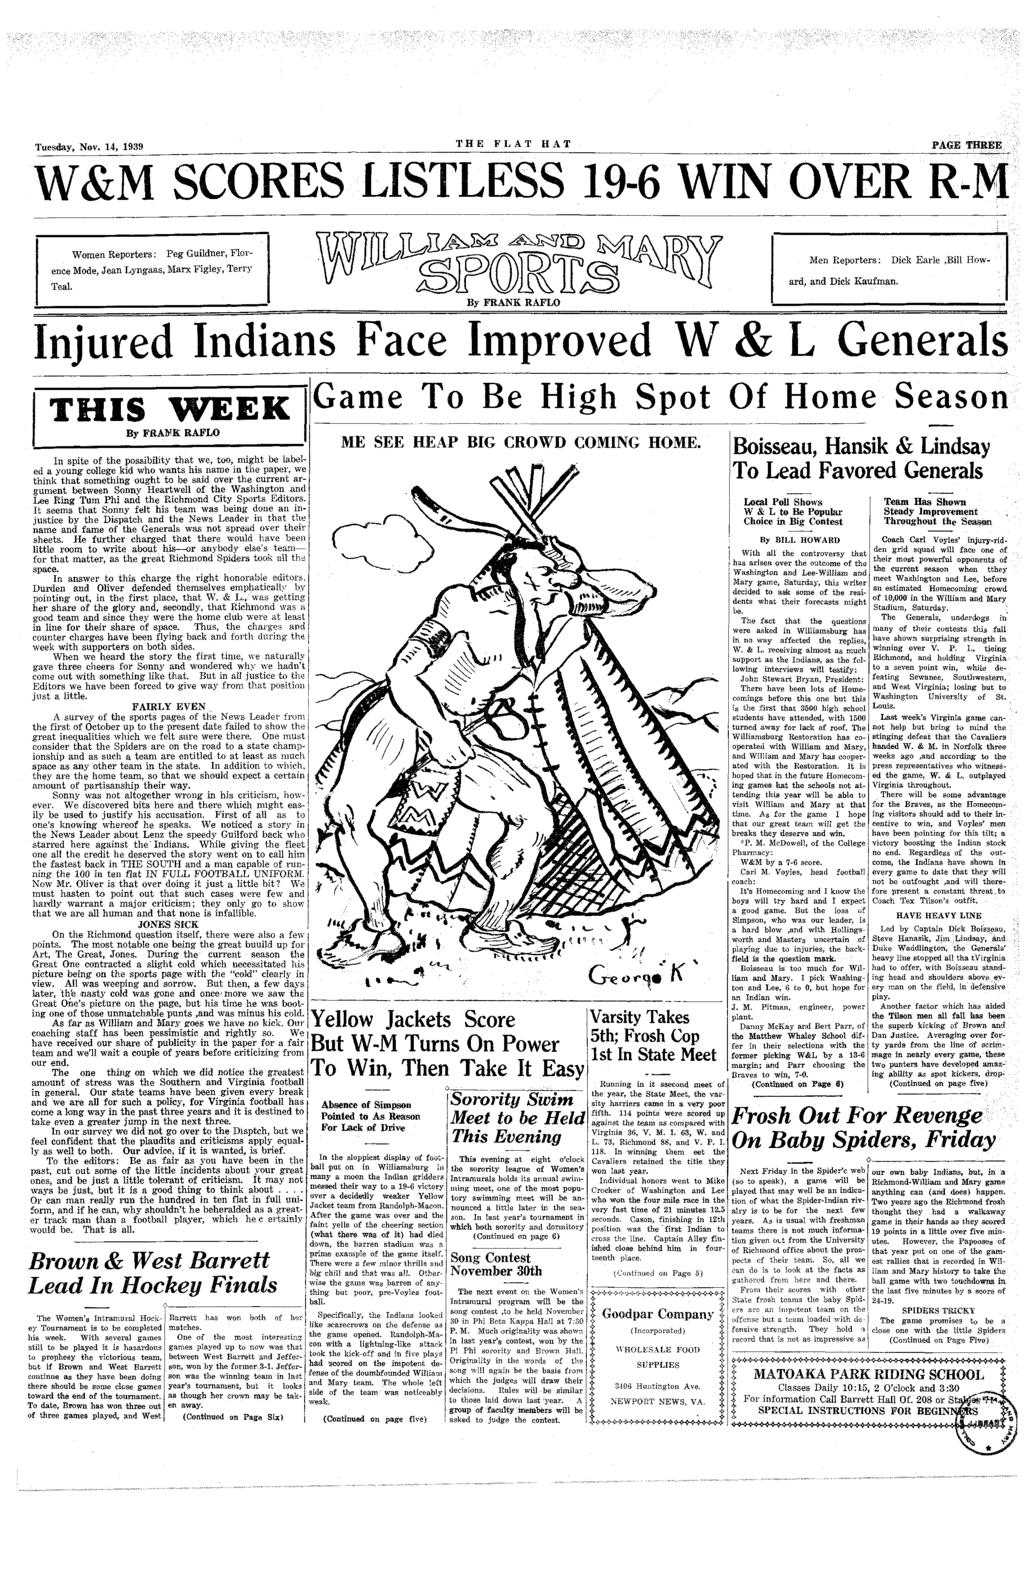 Tuesday, Nov. 14, 1939 THE FLAT HAT PAGE THEE! W&M SCORES LISTLESS 19-6 WIN OVER R Women Reporers; Peg Guildner, Florence Mode, Jean Lyngaas, Marx Figley, Terry Teal. JIJIJU^ ^5?